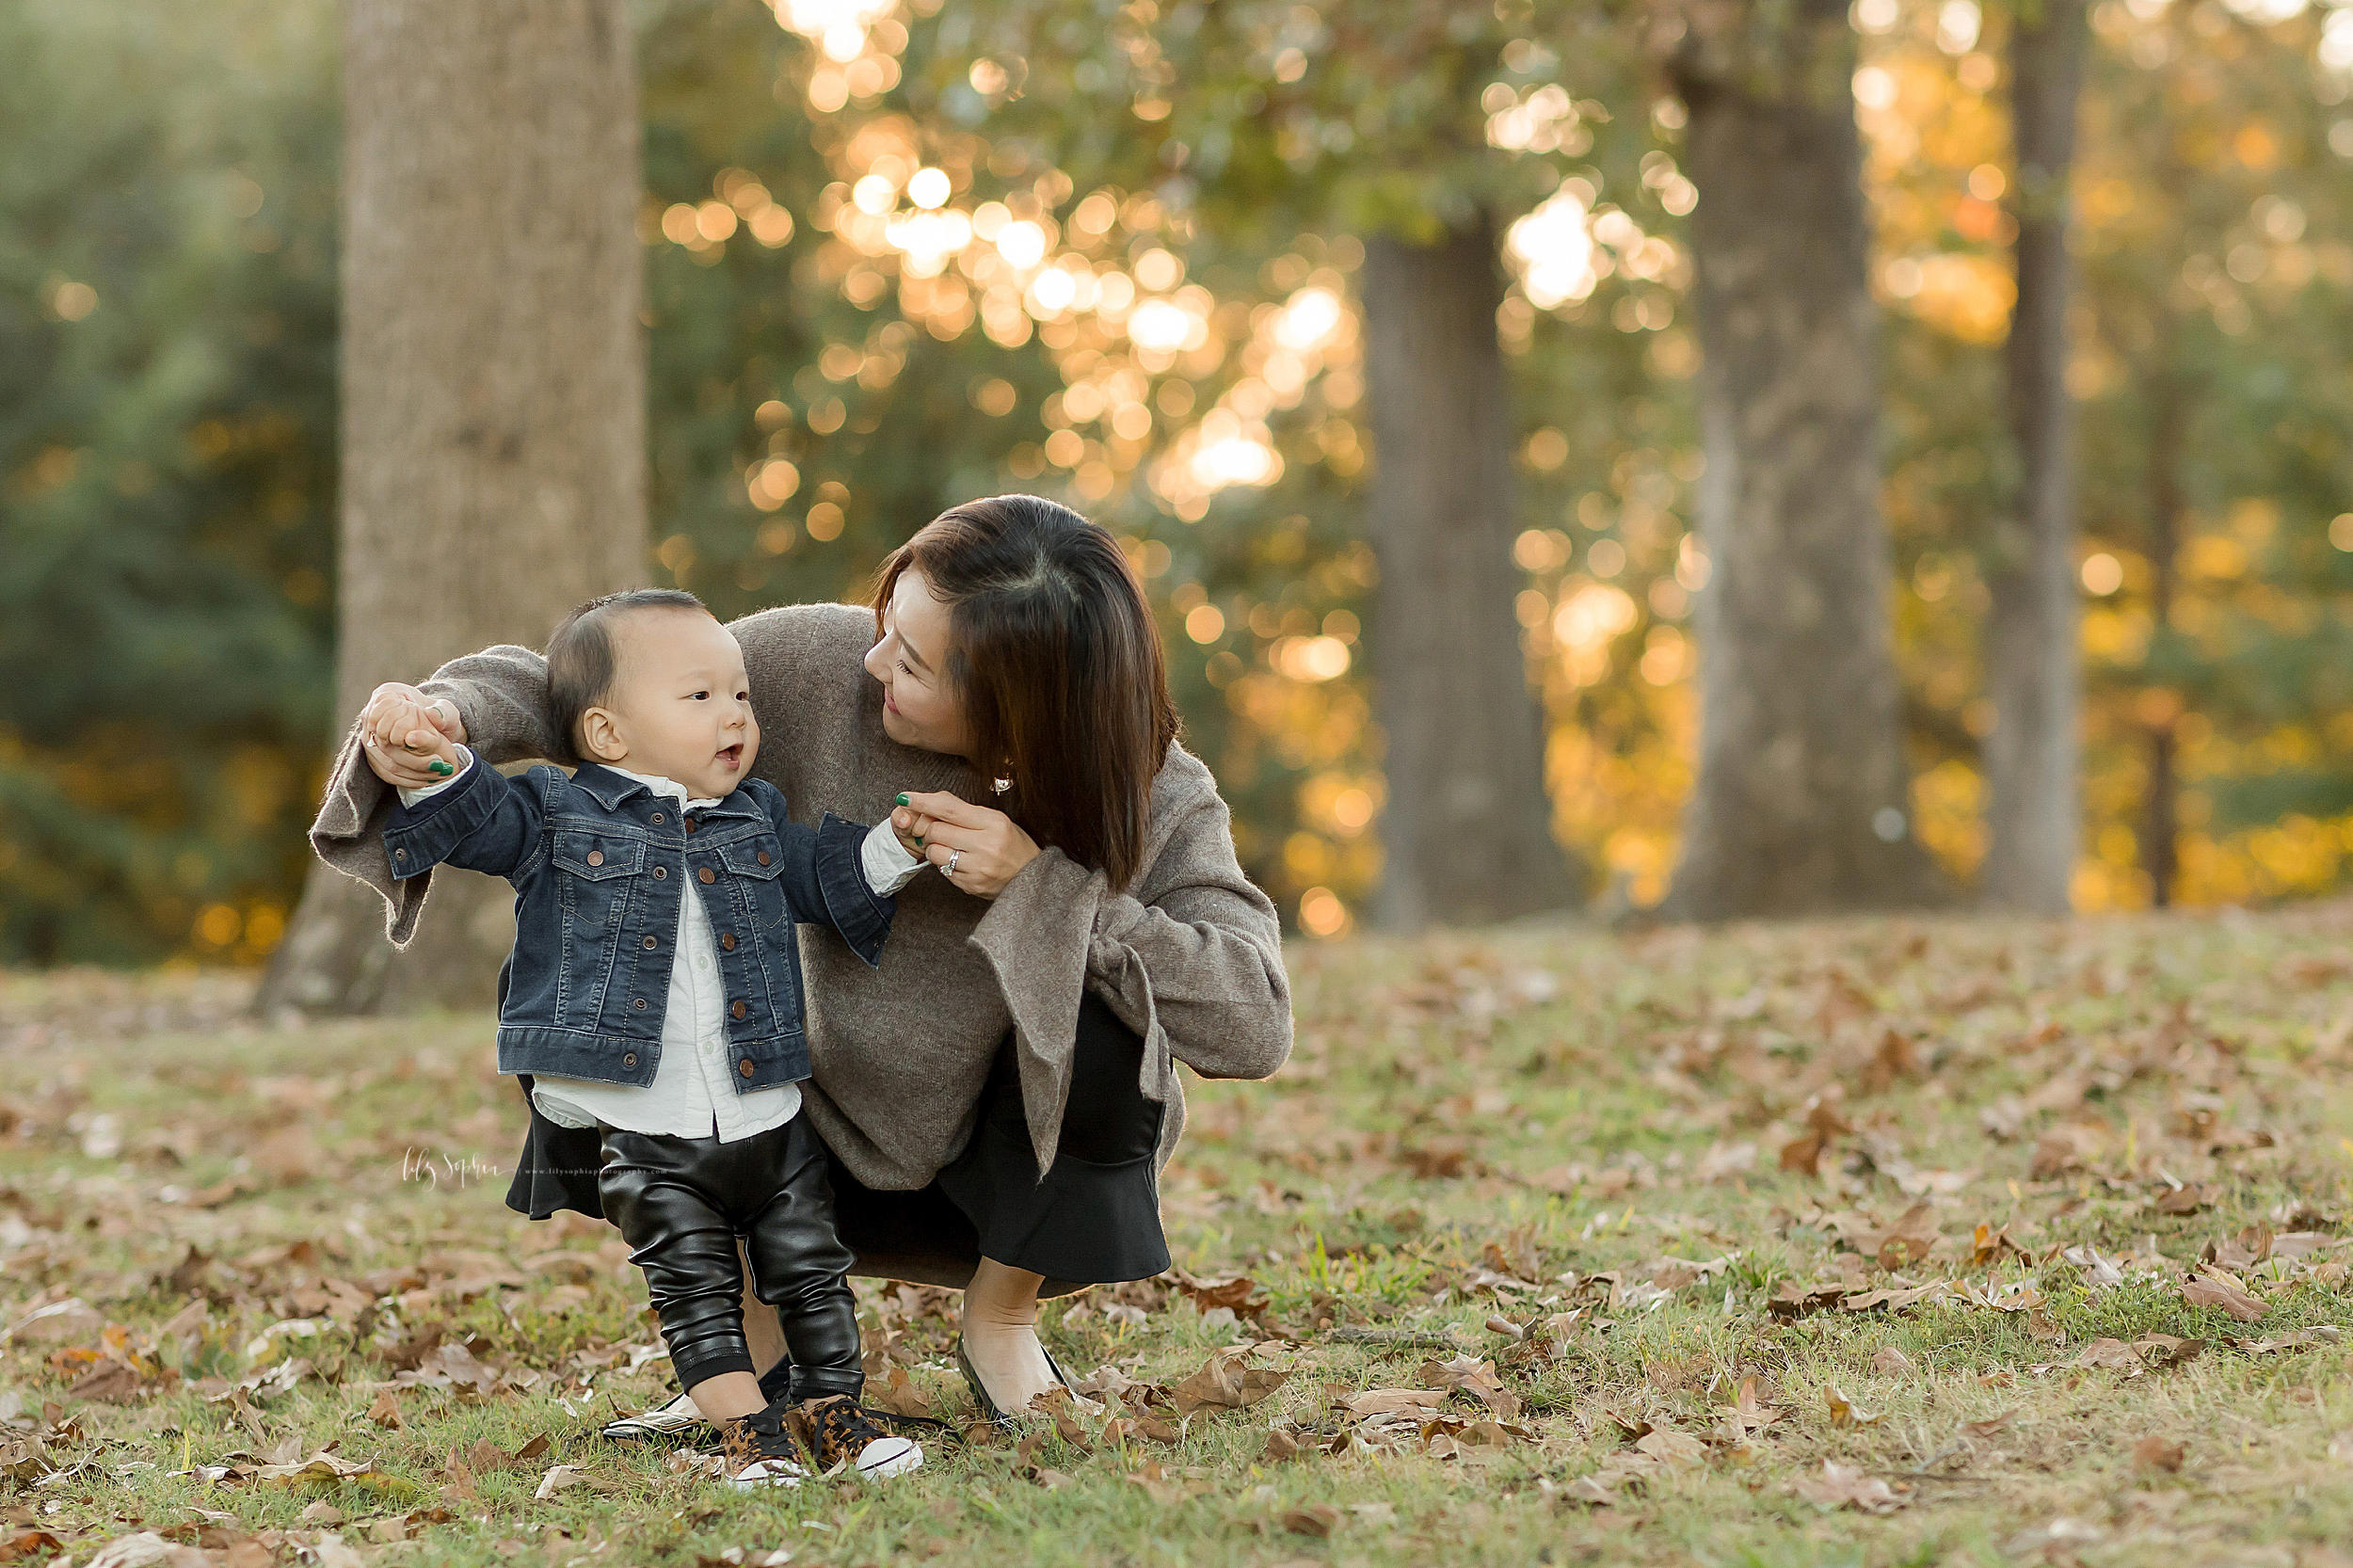 atlanta-buckhead-brookhaven-decatur-lily-sophia-photography--photographer-portraits-grant-park-intown-park-sunset-first-birthday-cake-smash-one-year-old-outdoors-cool-asian-american-family_0087.jpg